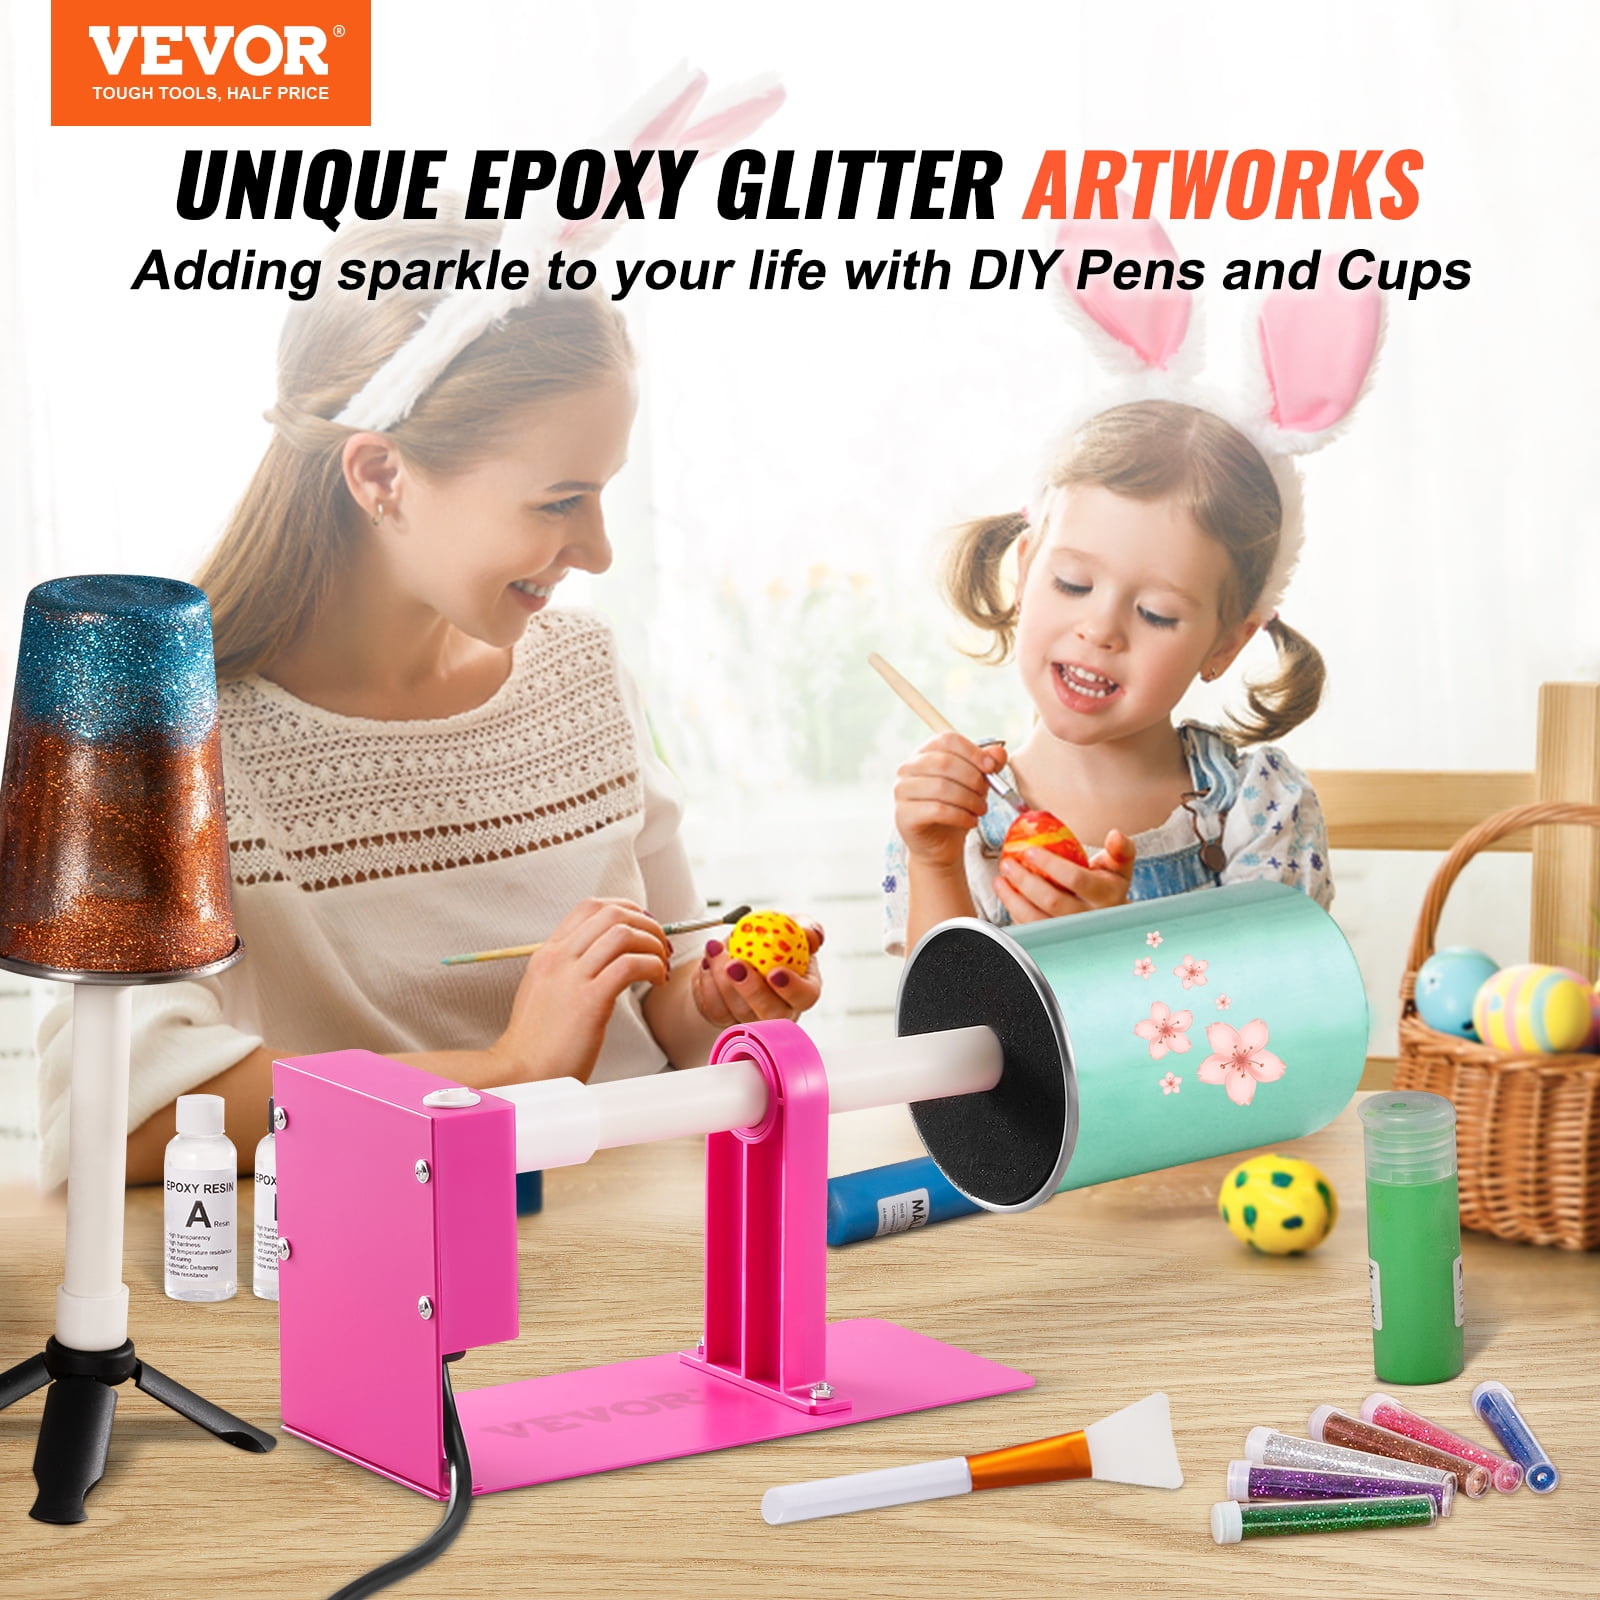 VEVOR Double Cup Turner 2-Arm Pen Turner with Epoxy Resin Kit for